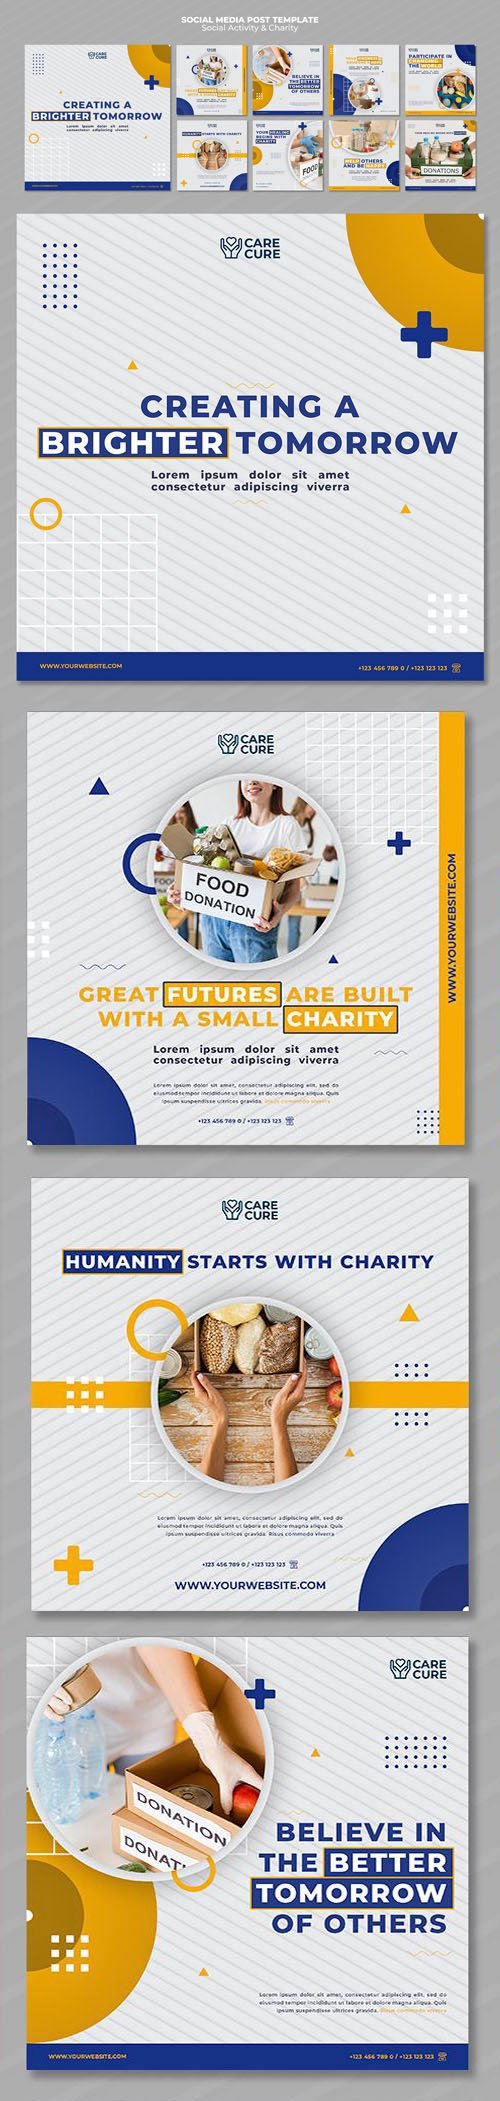 Charity & Social Activity Instagram Posts PSD Templates